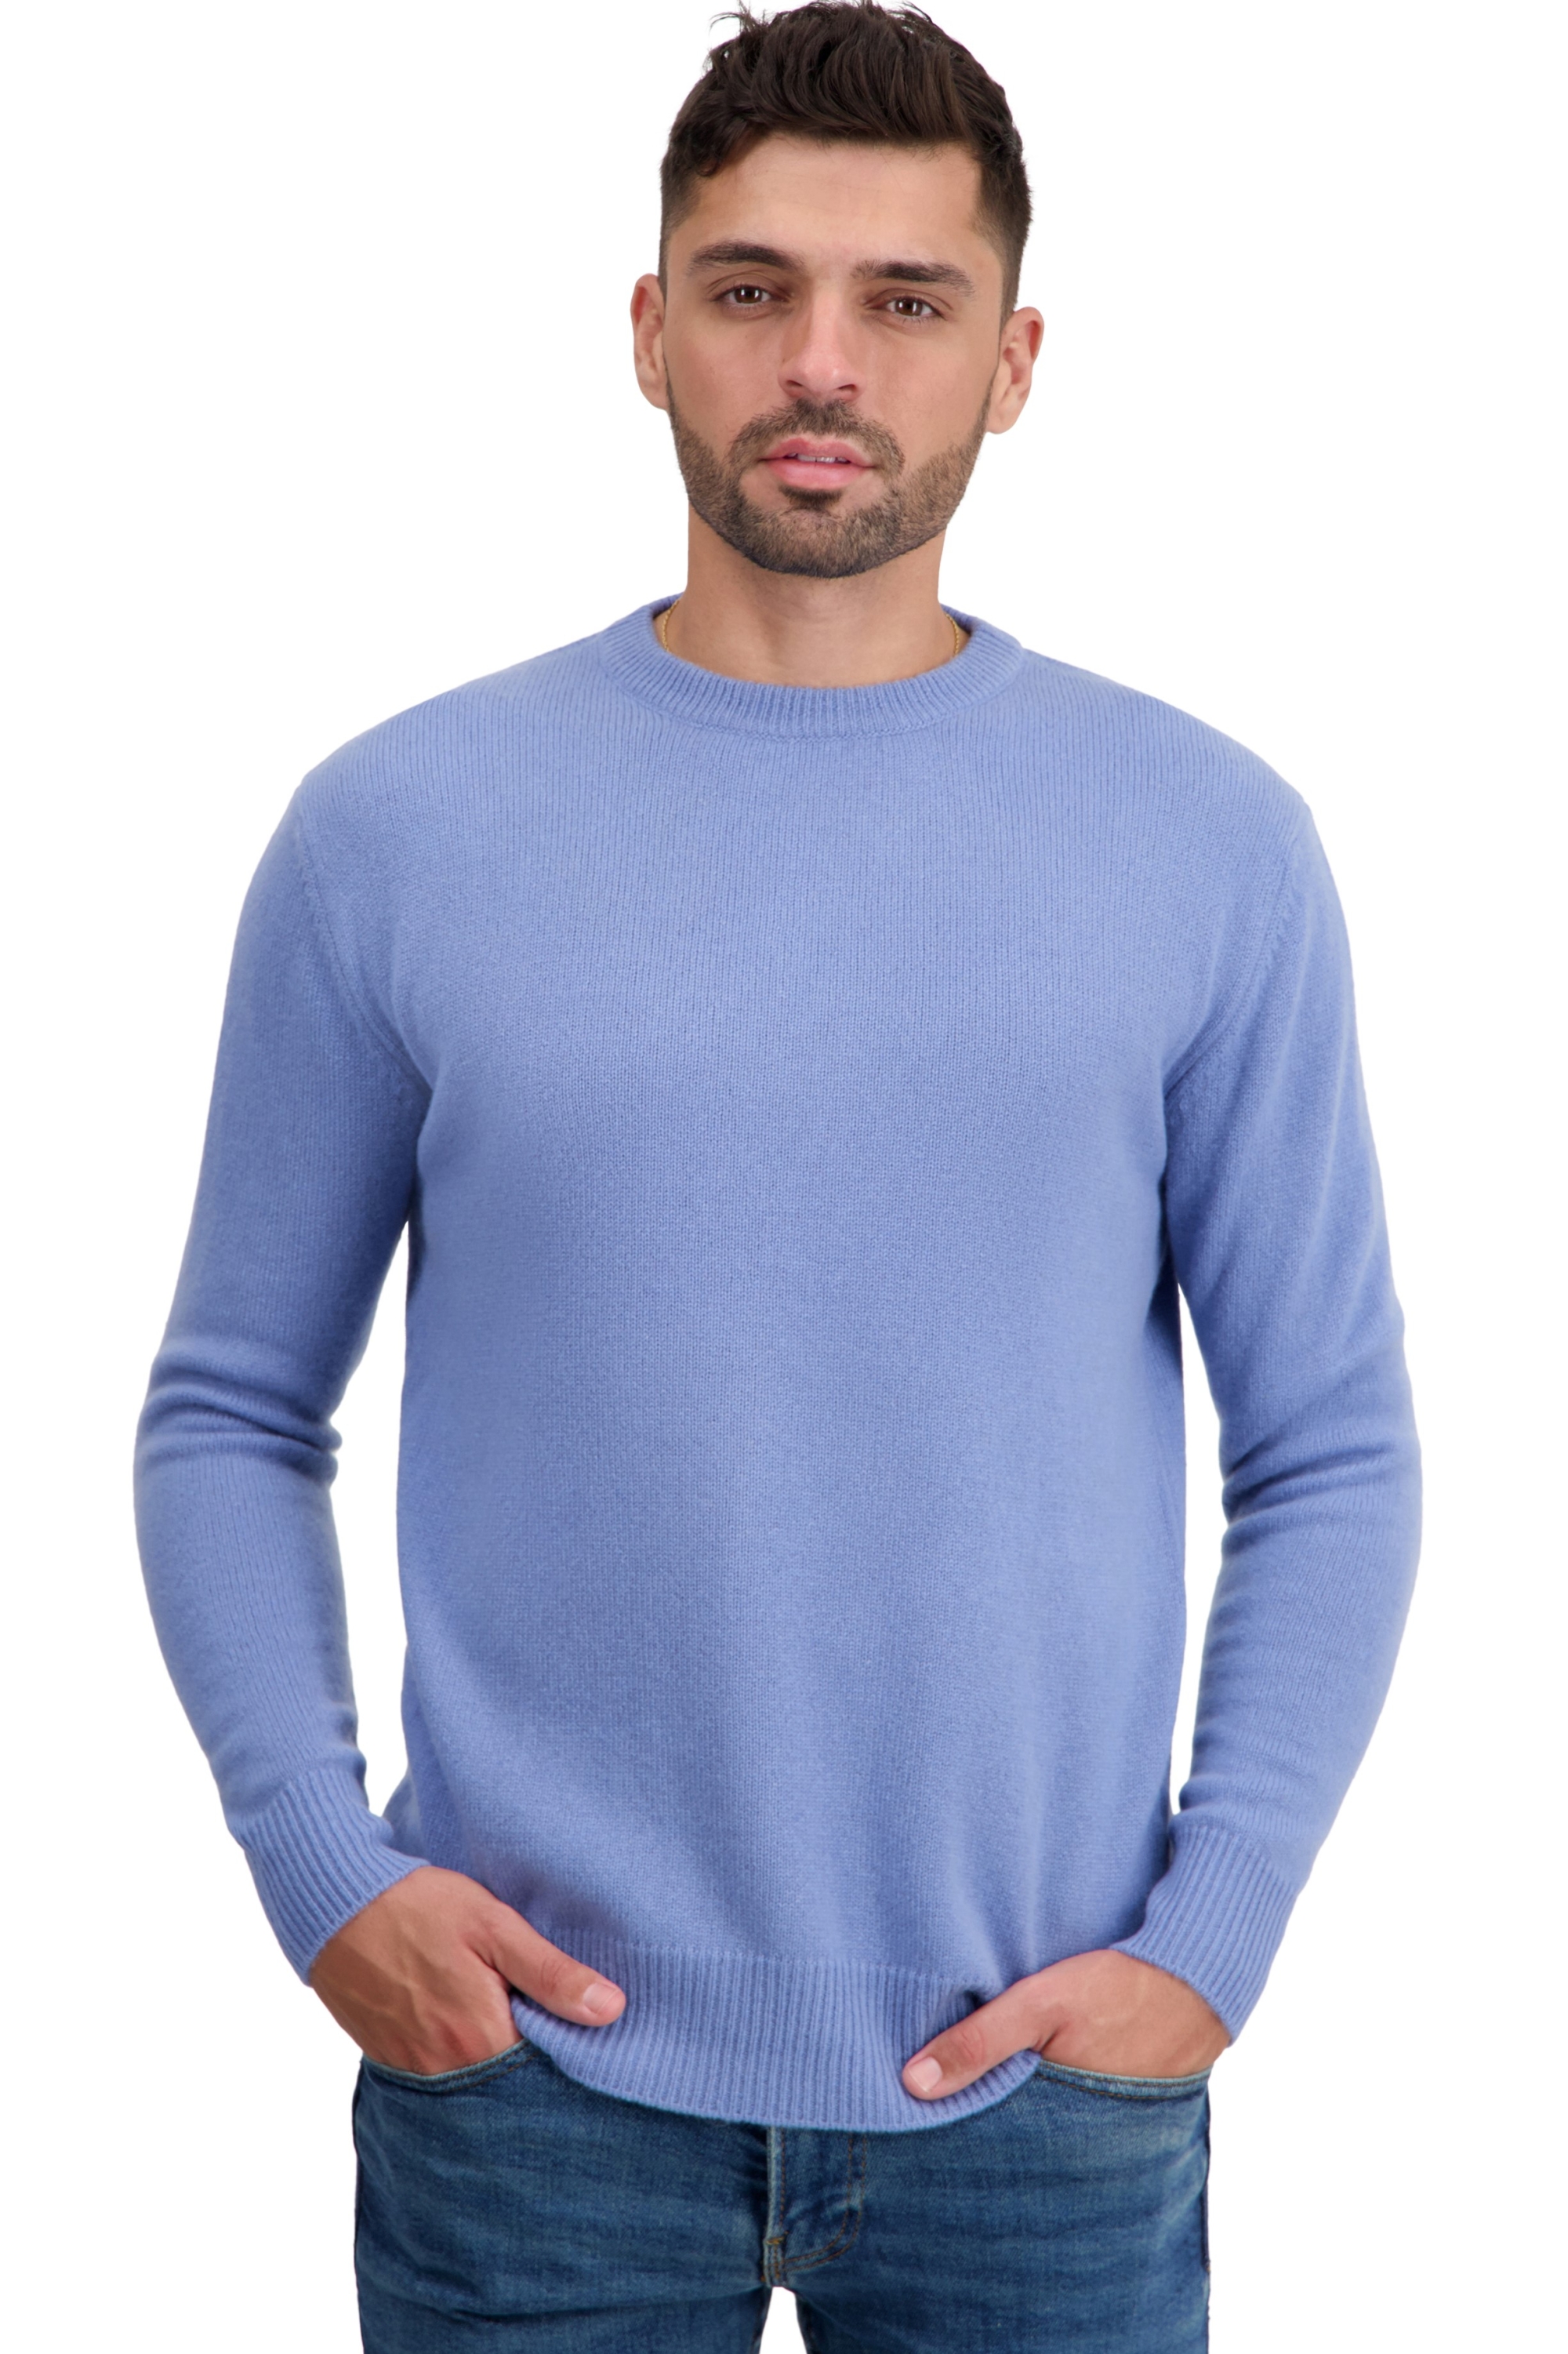 Cashmere men chunky sweater touraine first light blue s